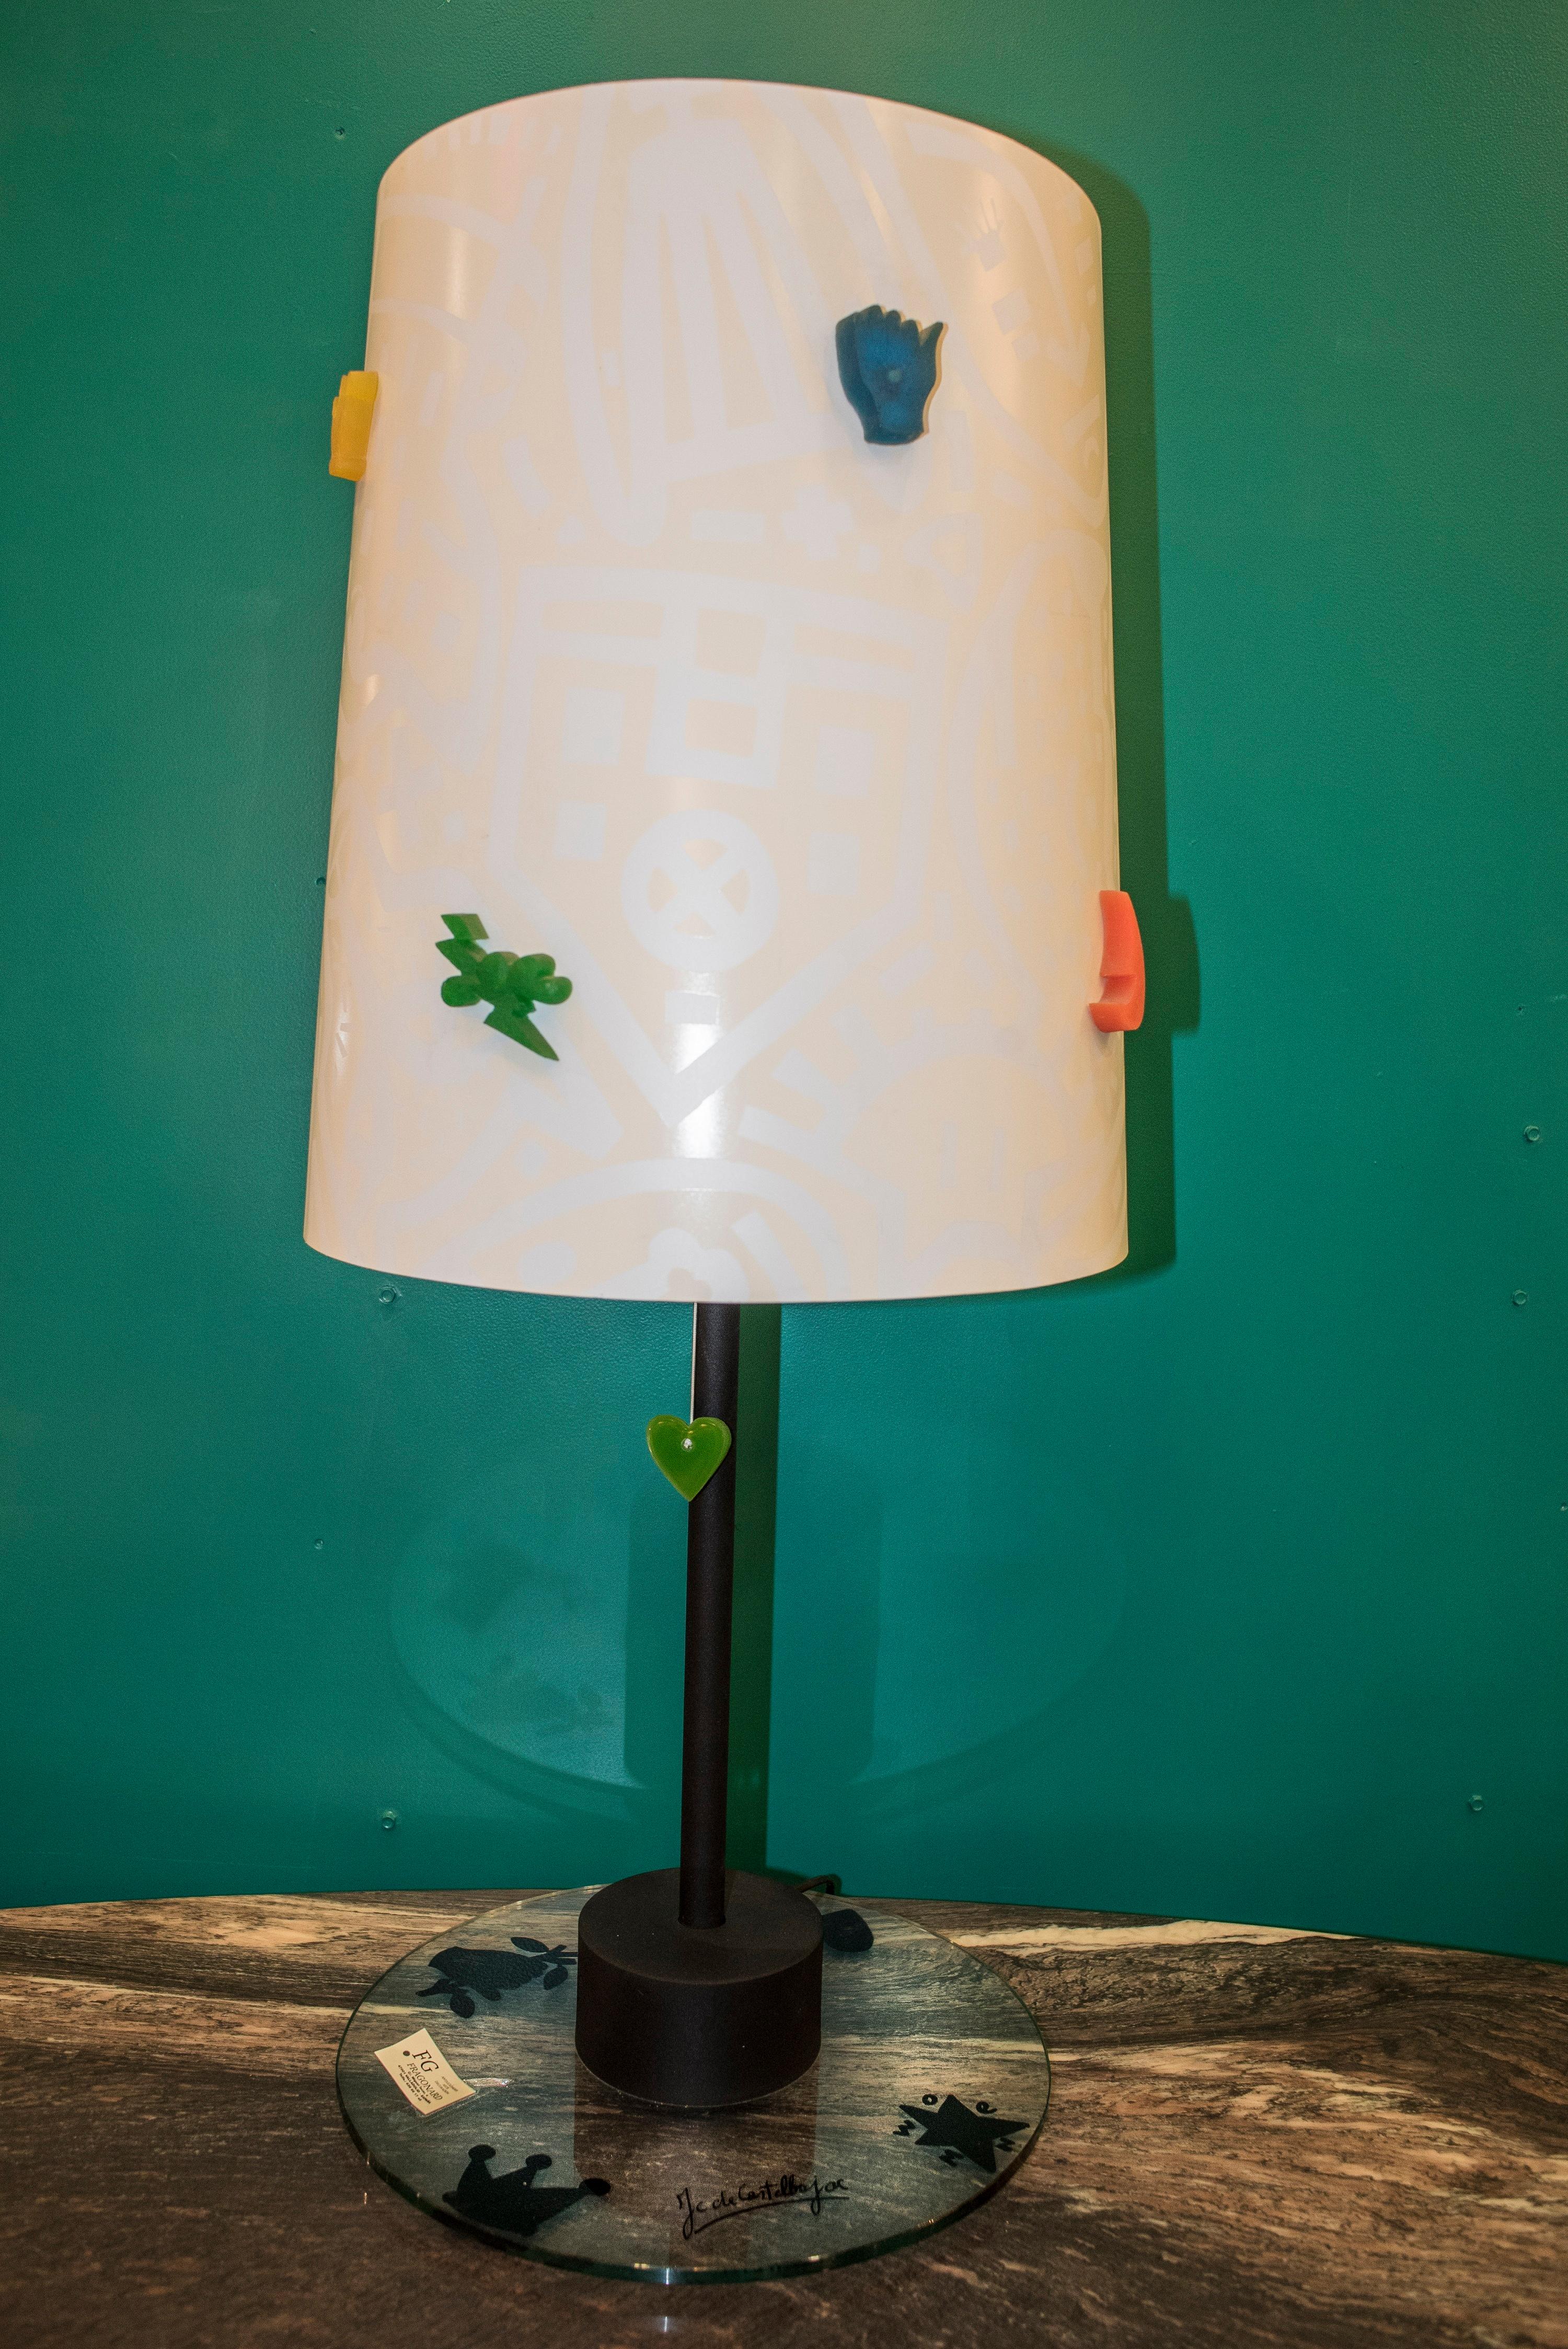 Late 20th Century J.Charles Castelbajac Table Lamp with Diferentescolors and Patterns of Stars